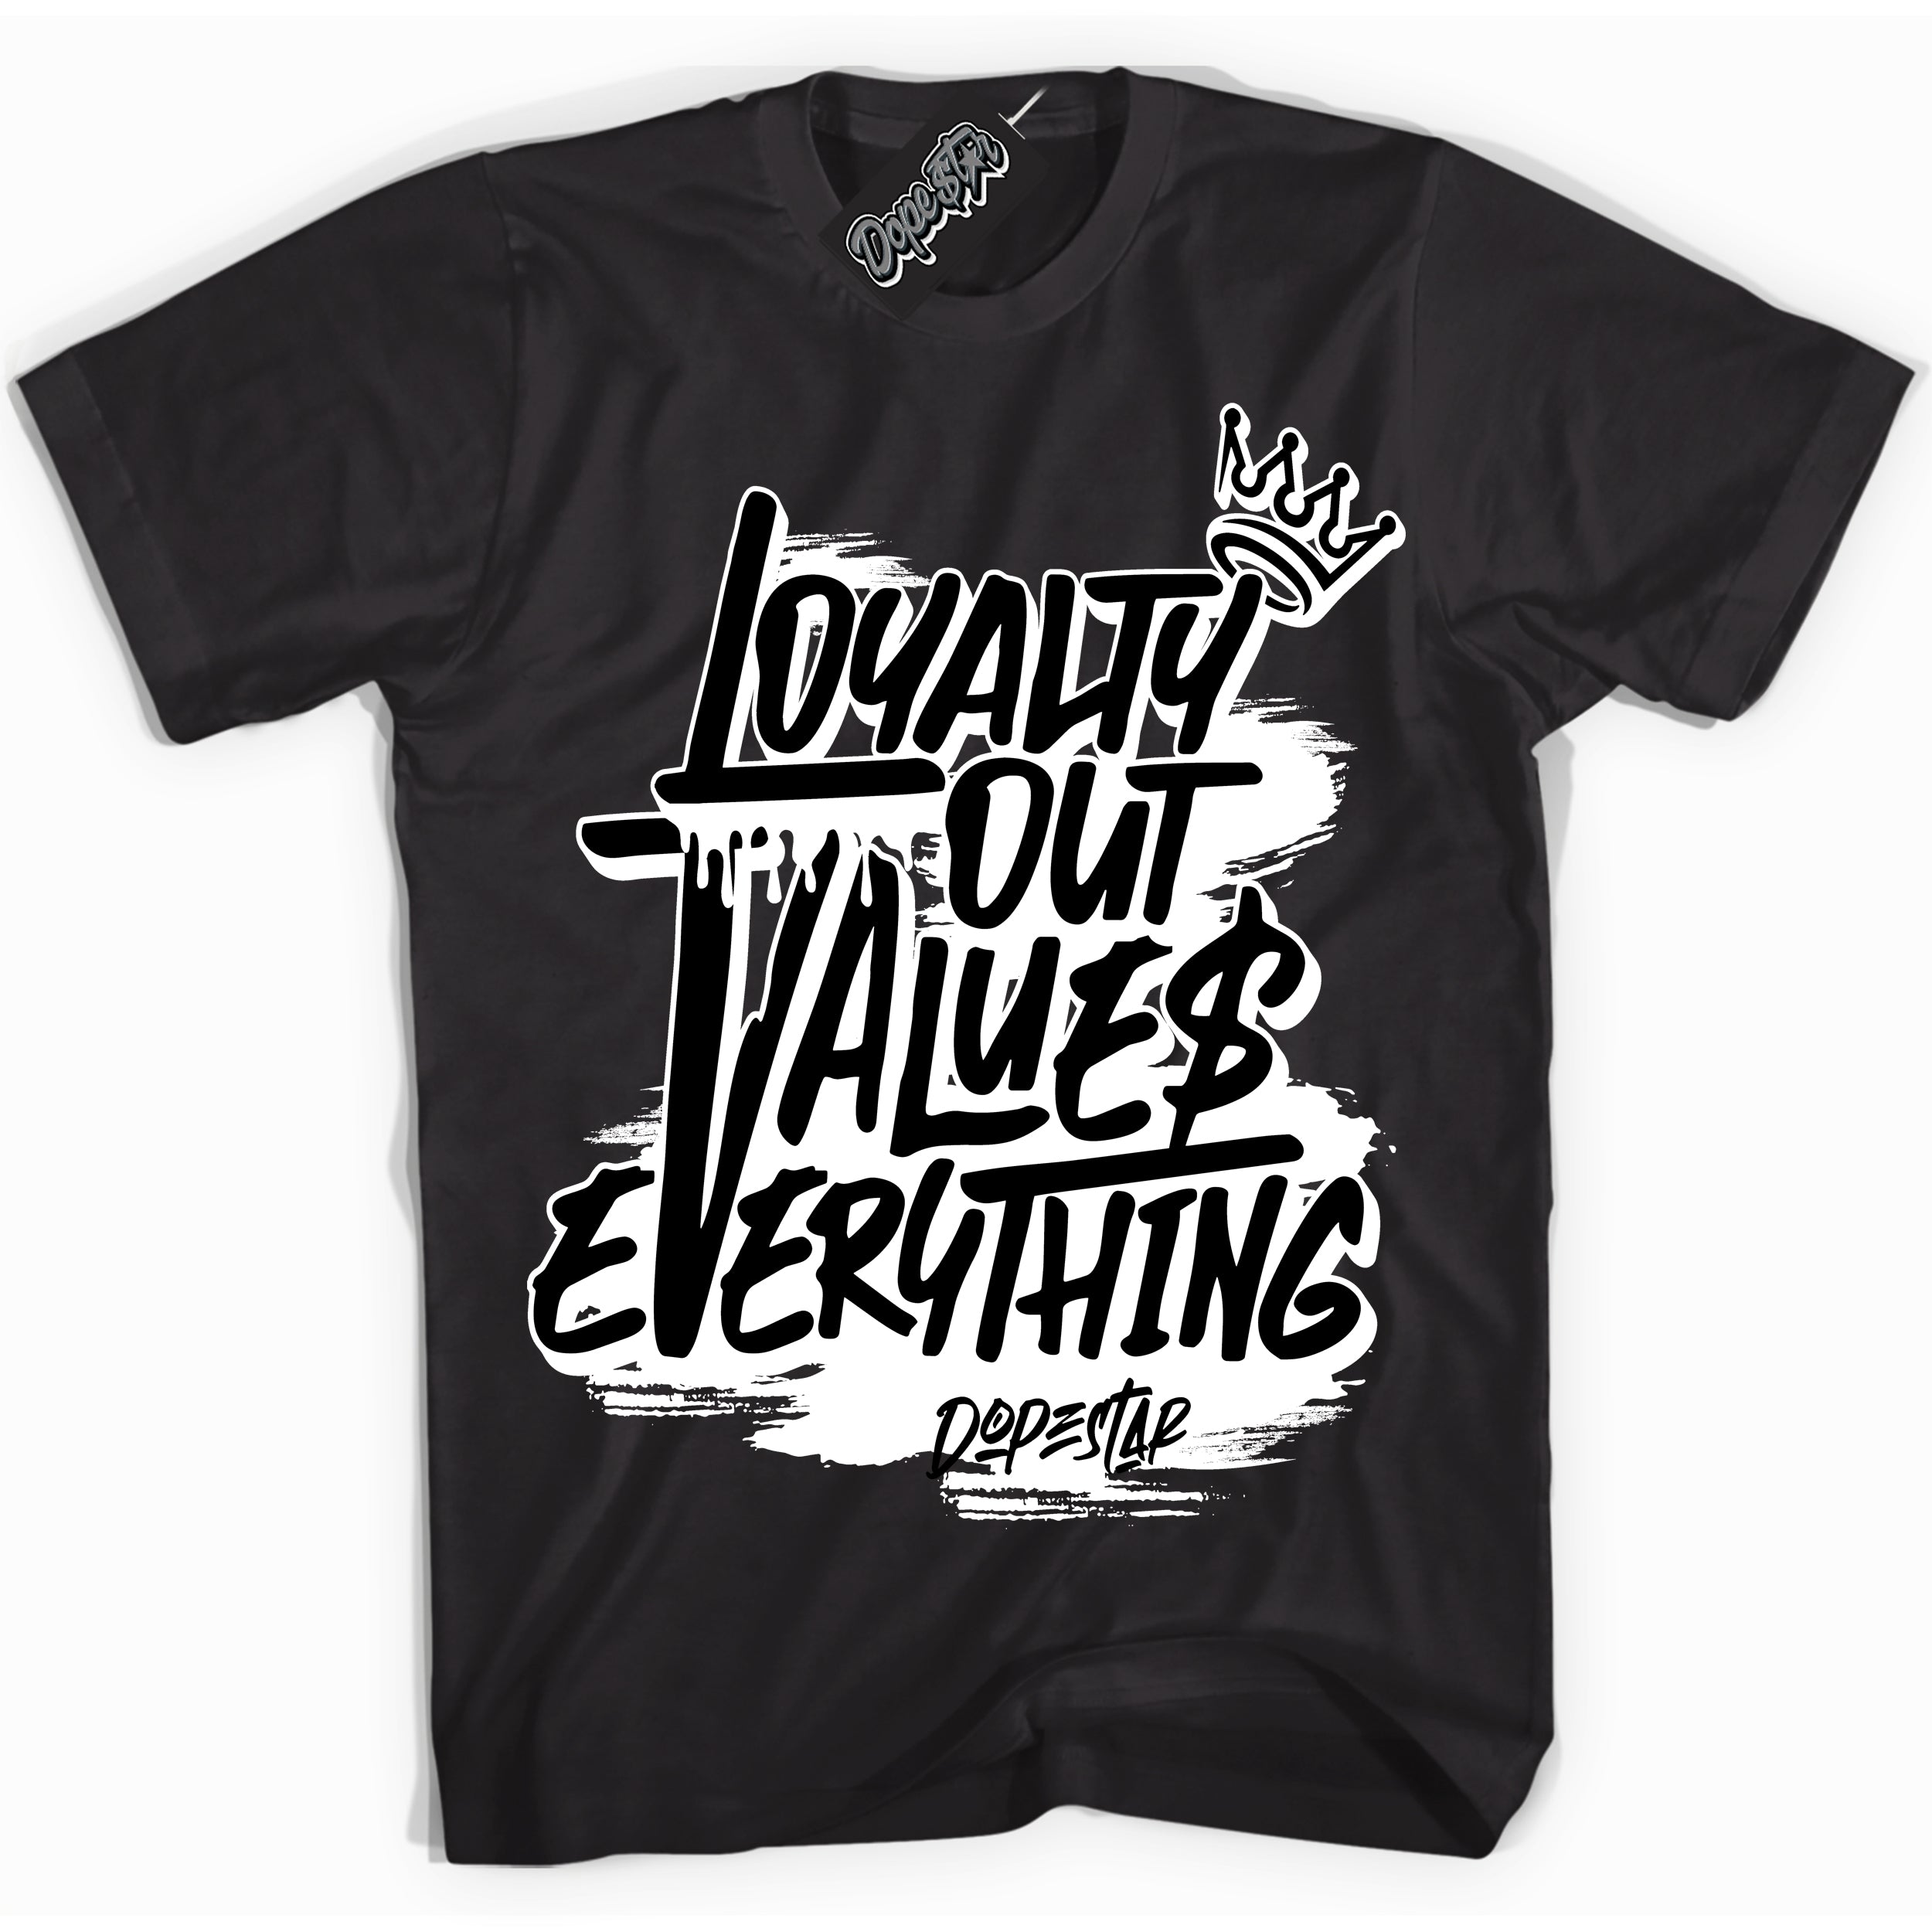 Cool Black Shirt with “ Loyalty Out Values Everything” design that perfectly matches Panda Sneakers.